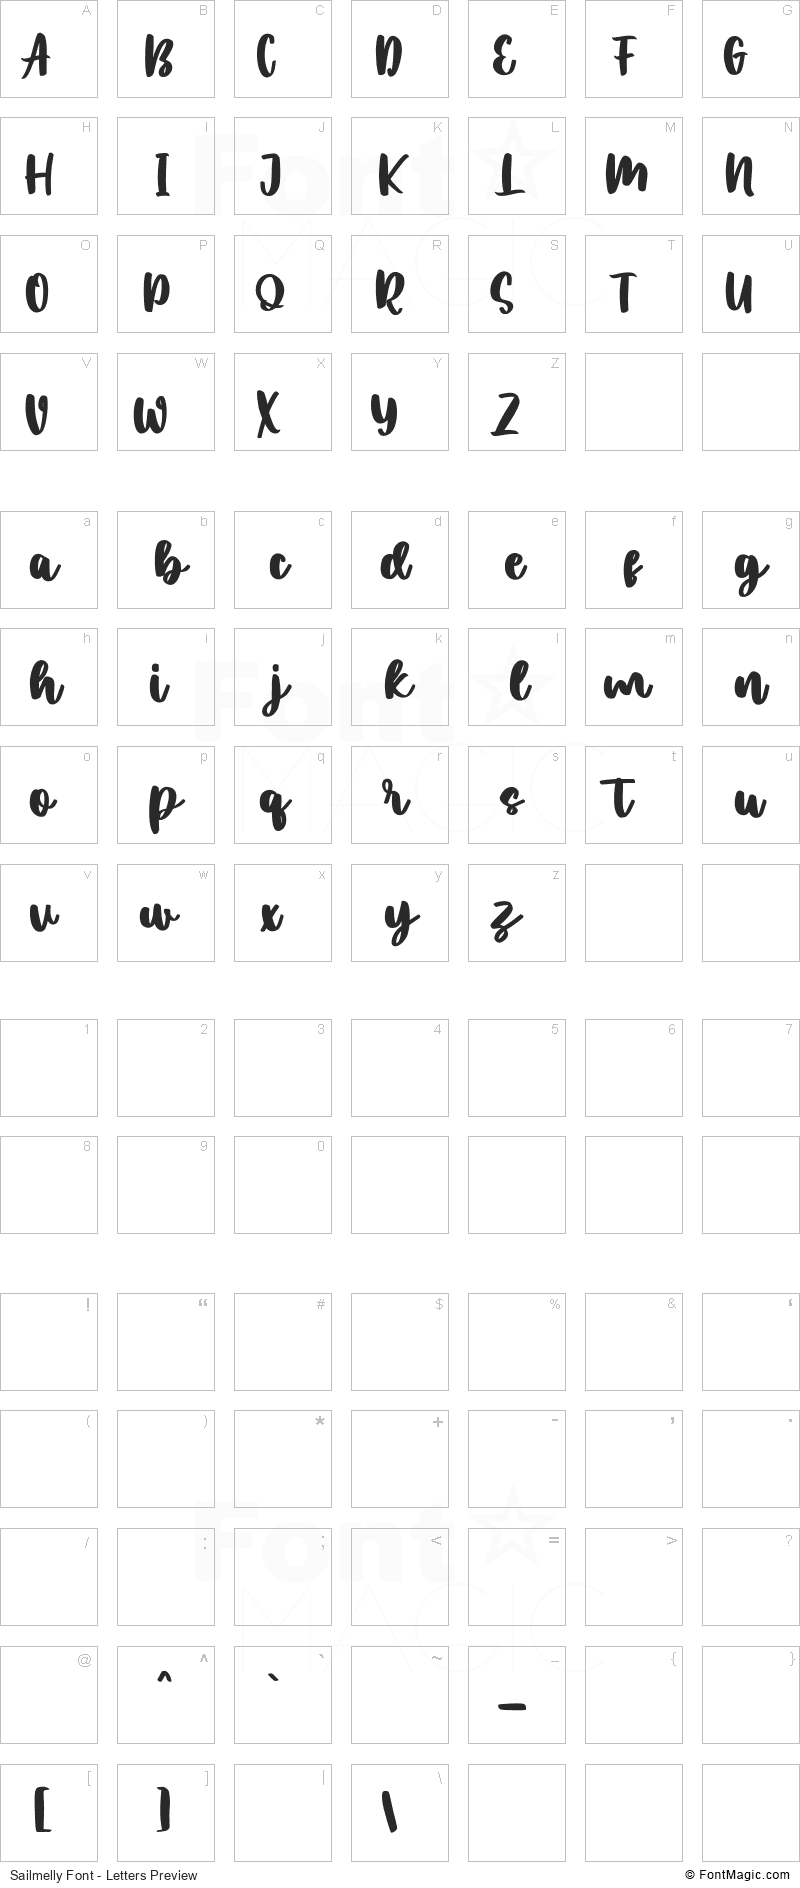 Sailmelly Font - All Latters Preview Chart